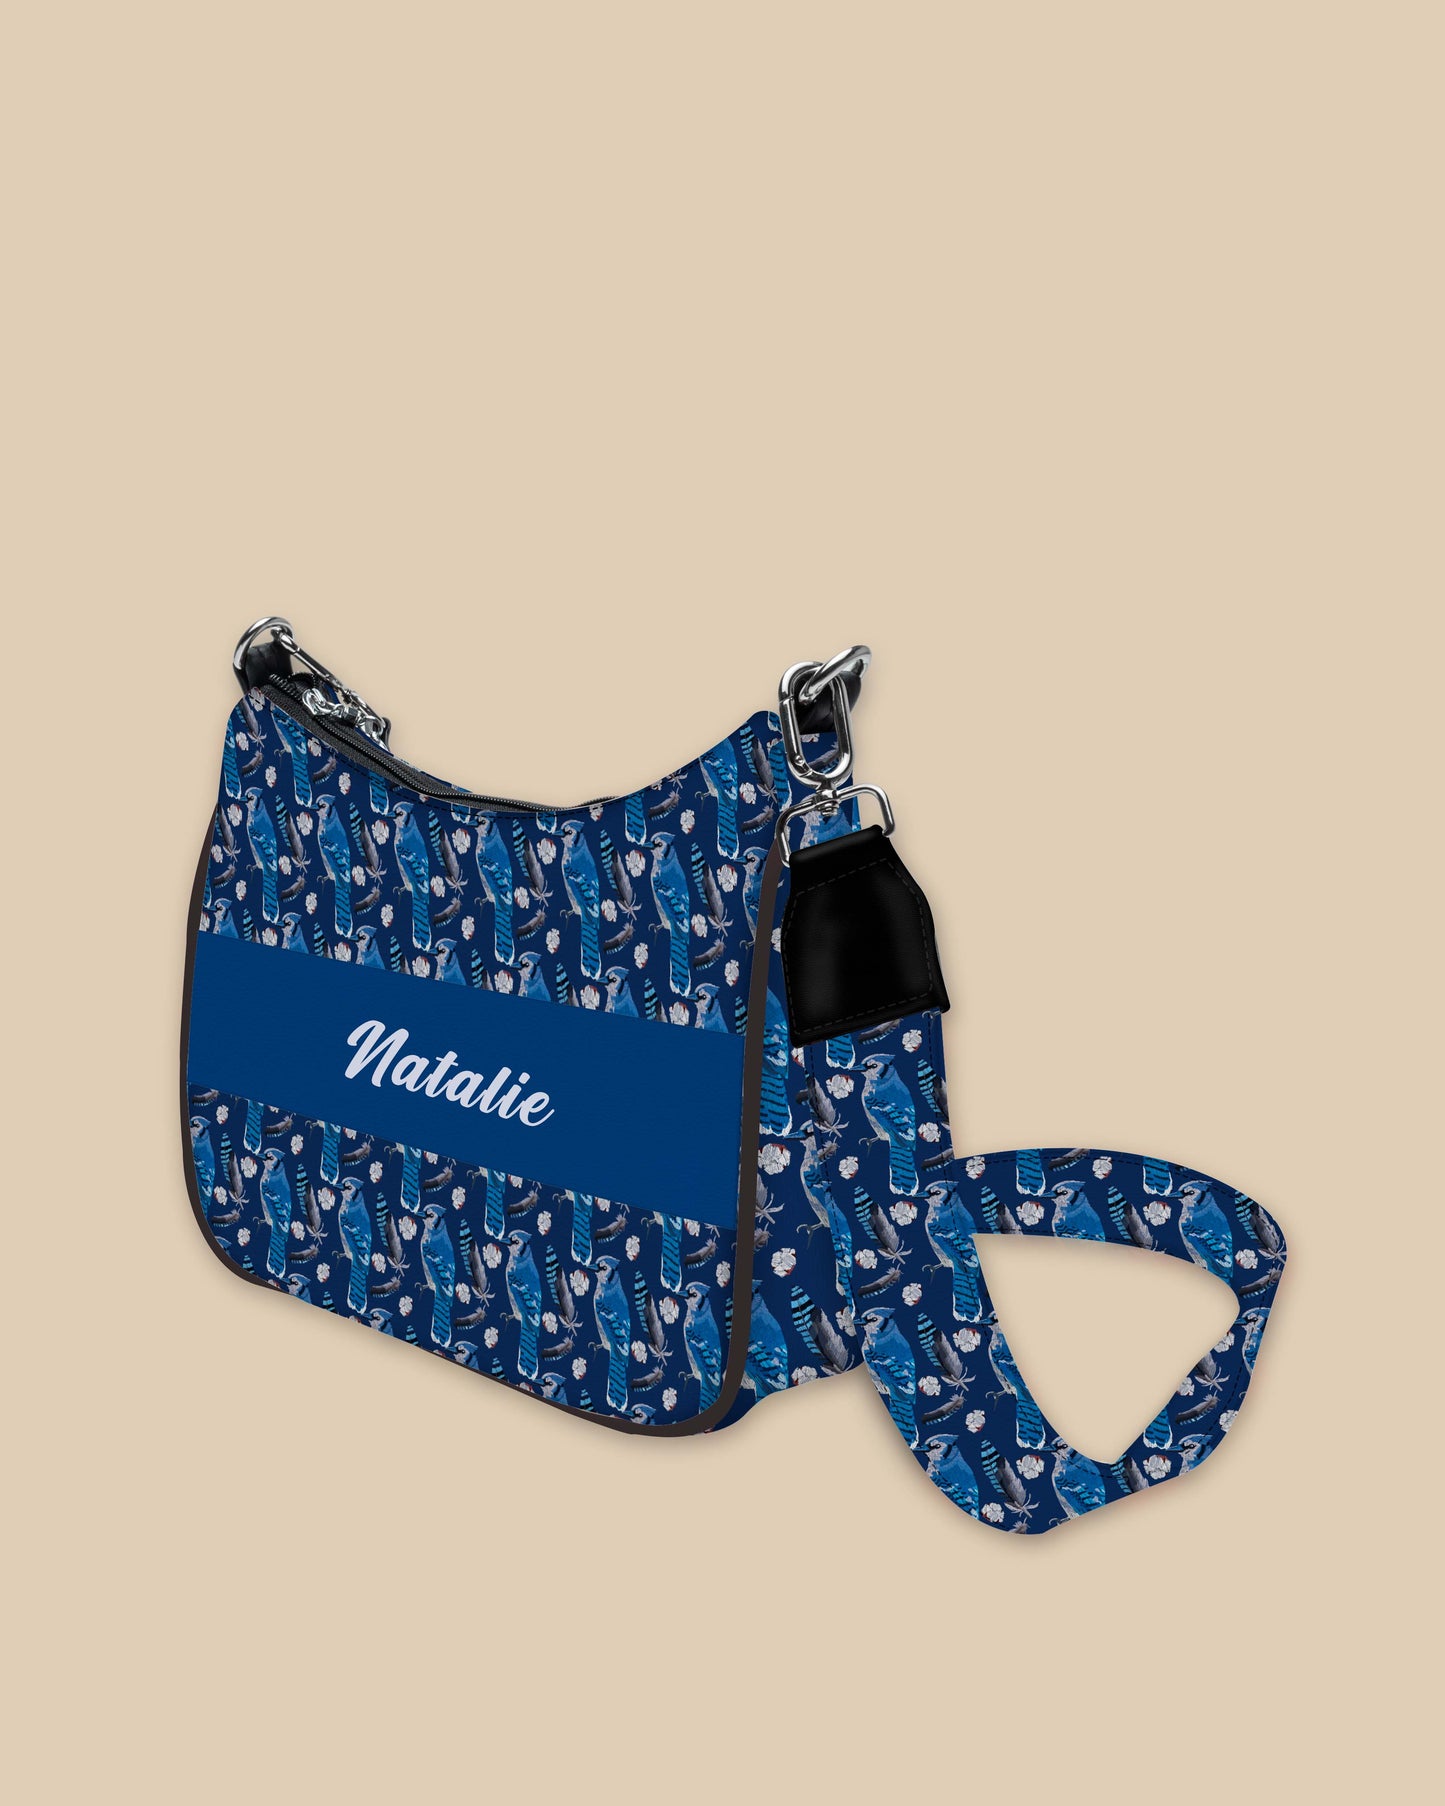 Customized Sling Bag Designed With Blue Jay Birds And Feather